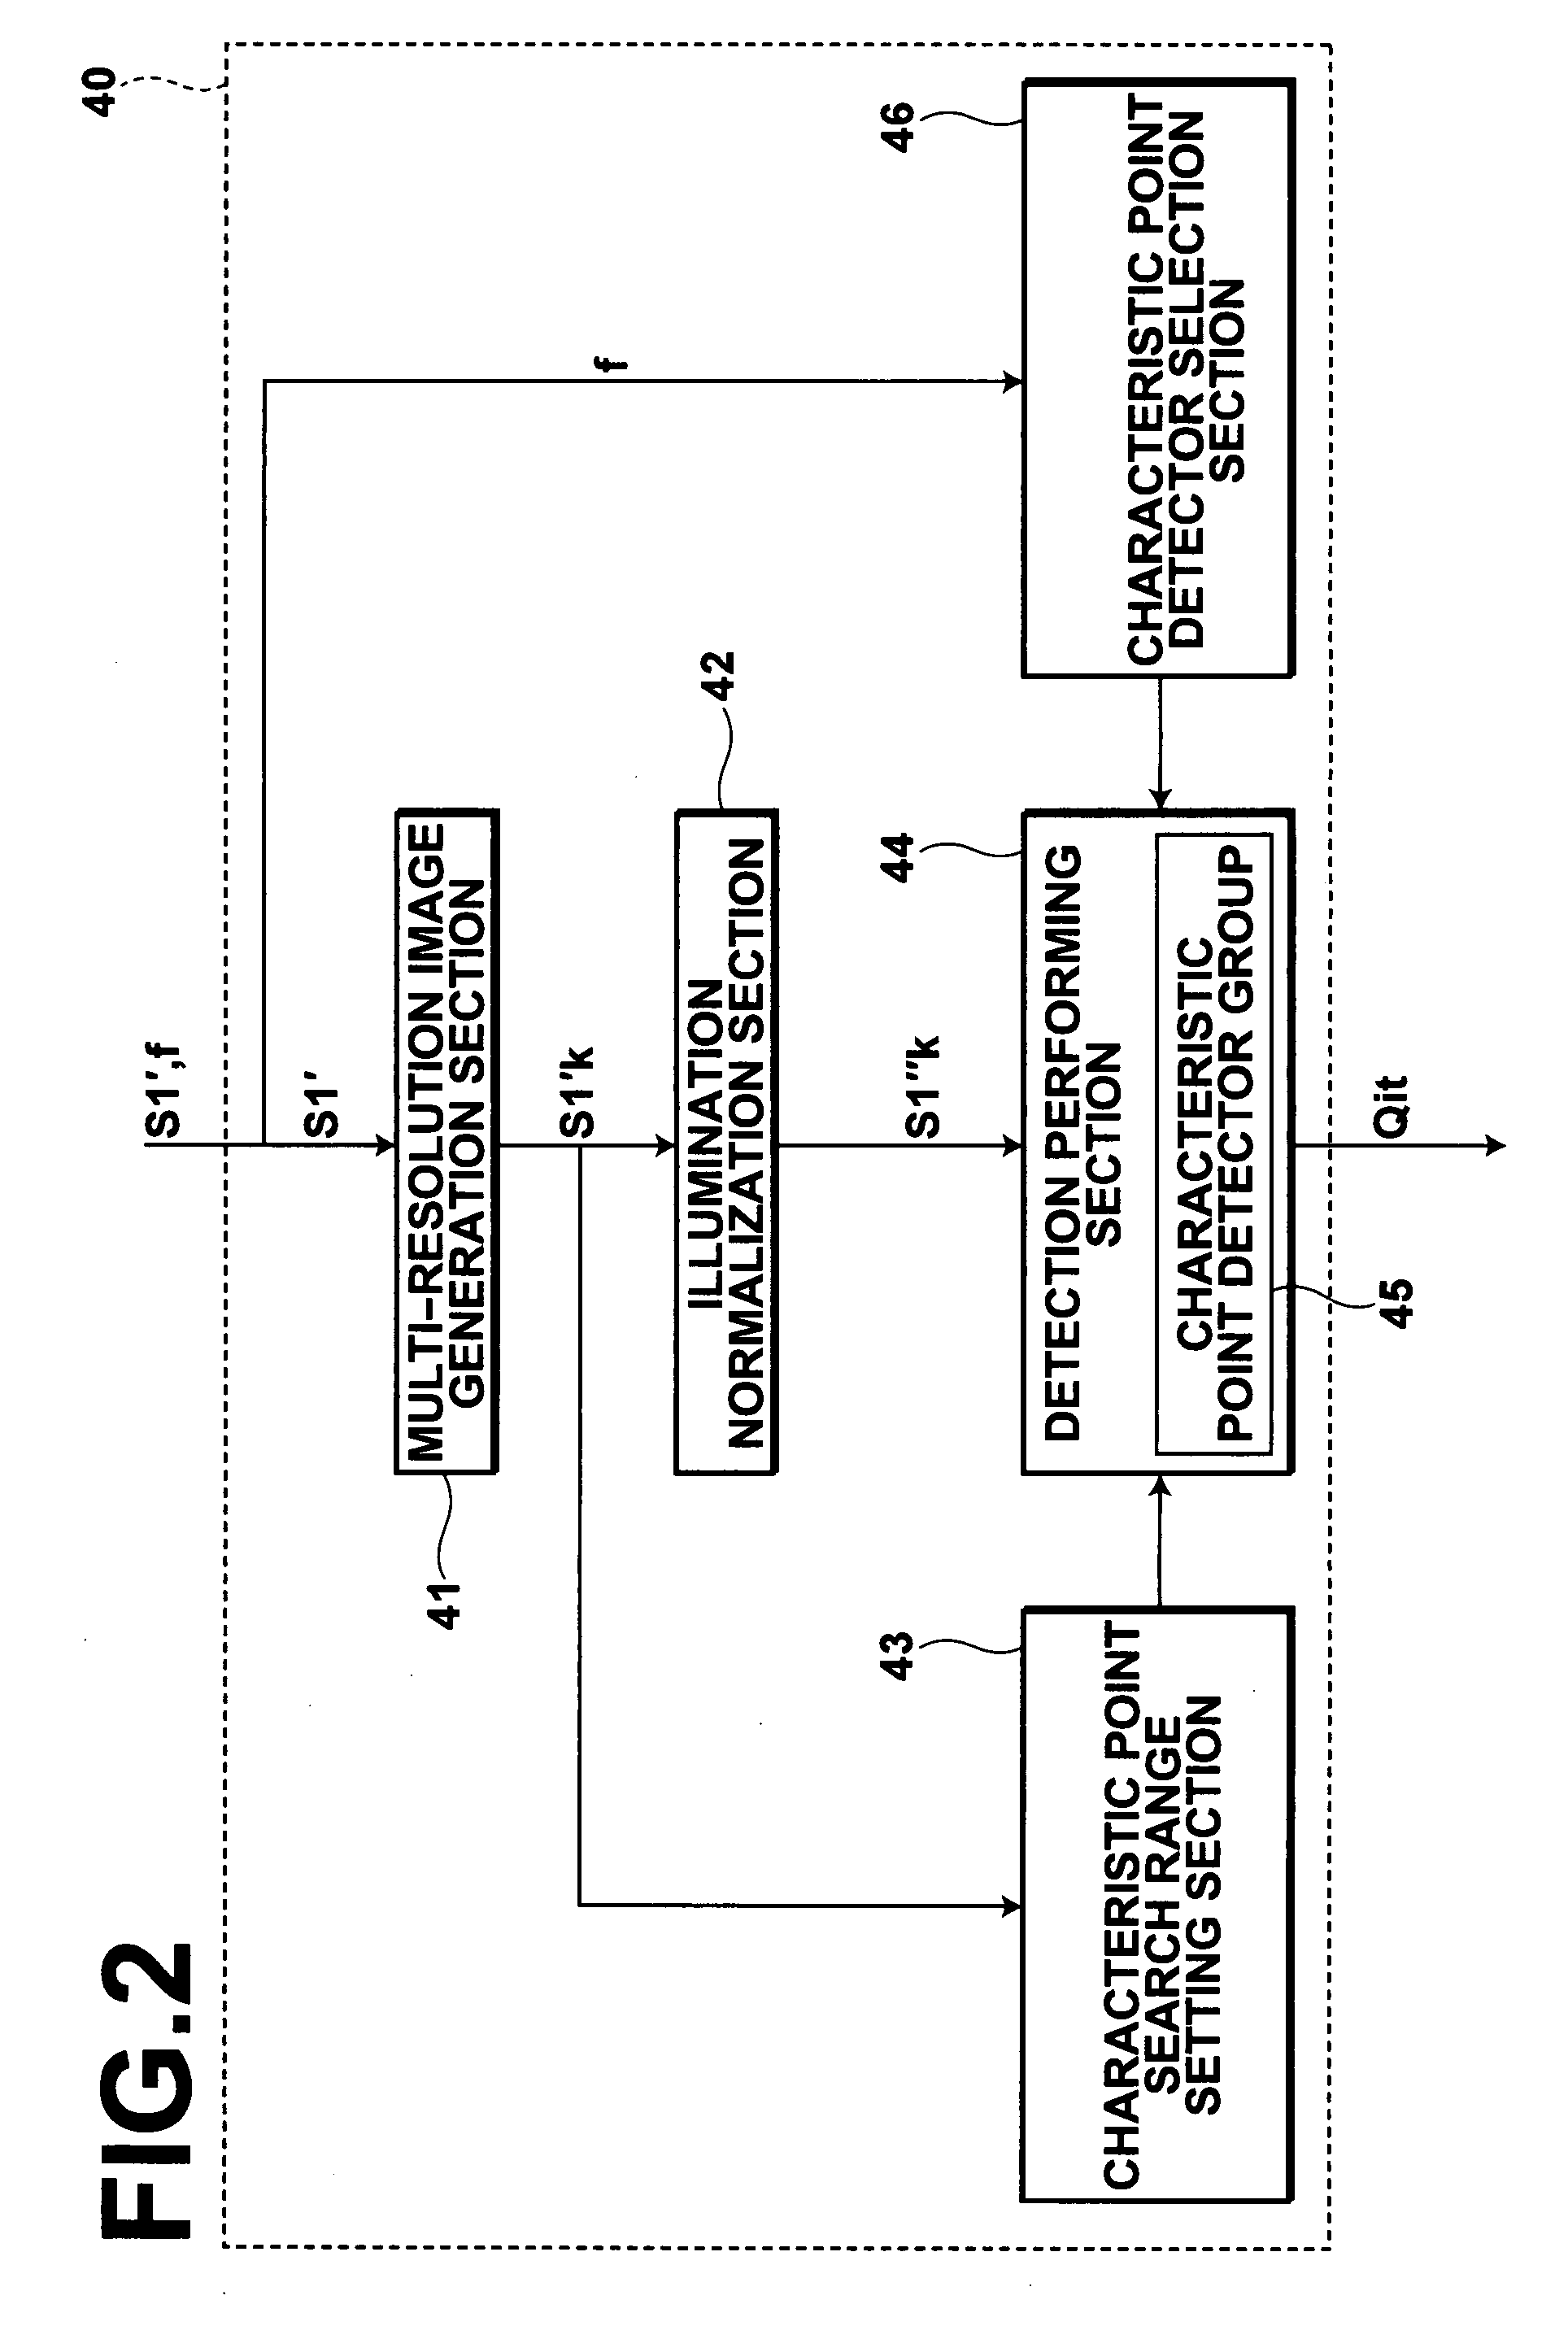 Characteristic point detection method, apparatus, and program